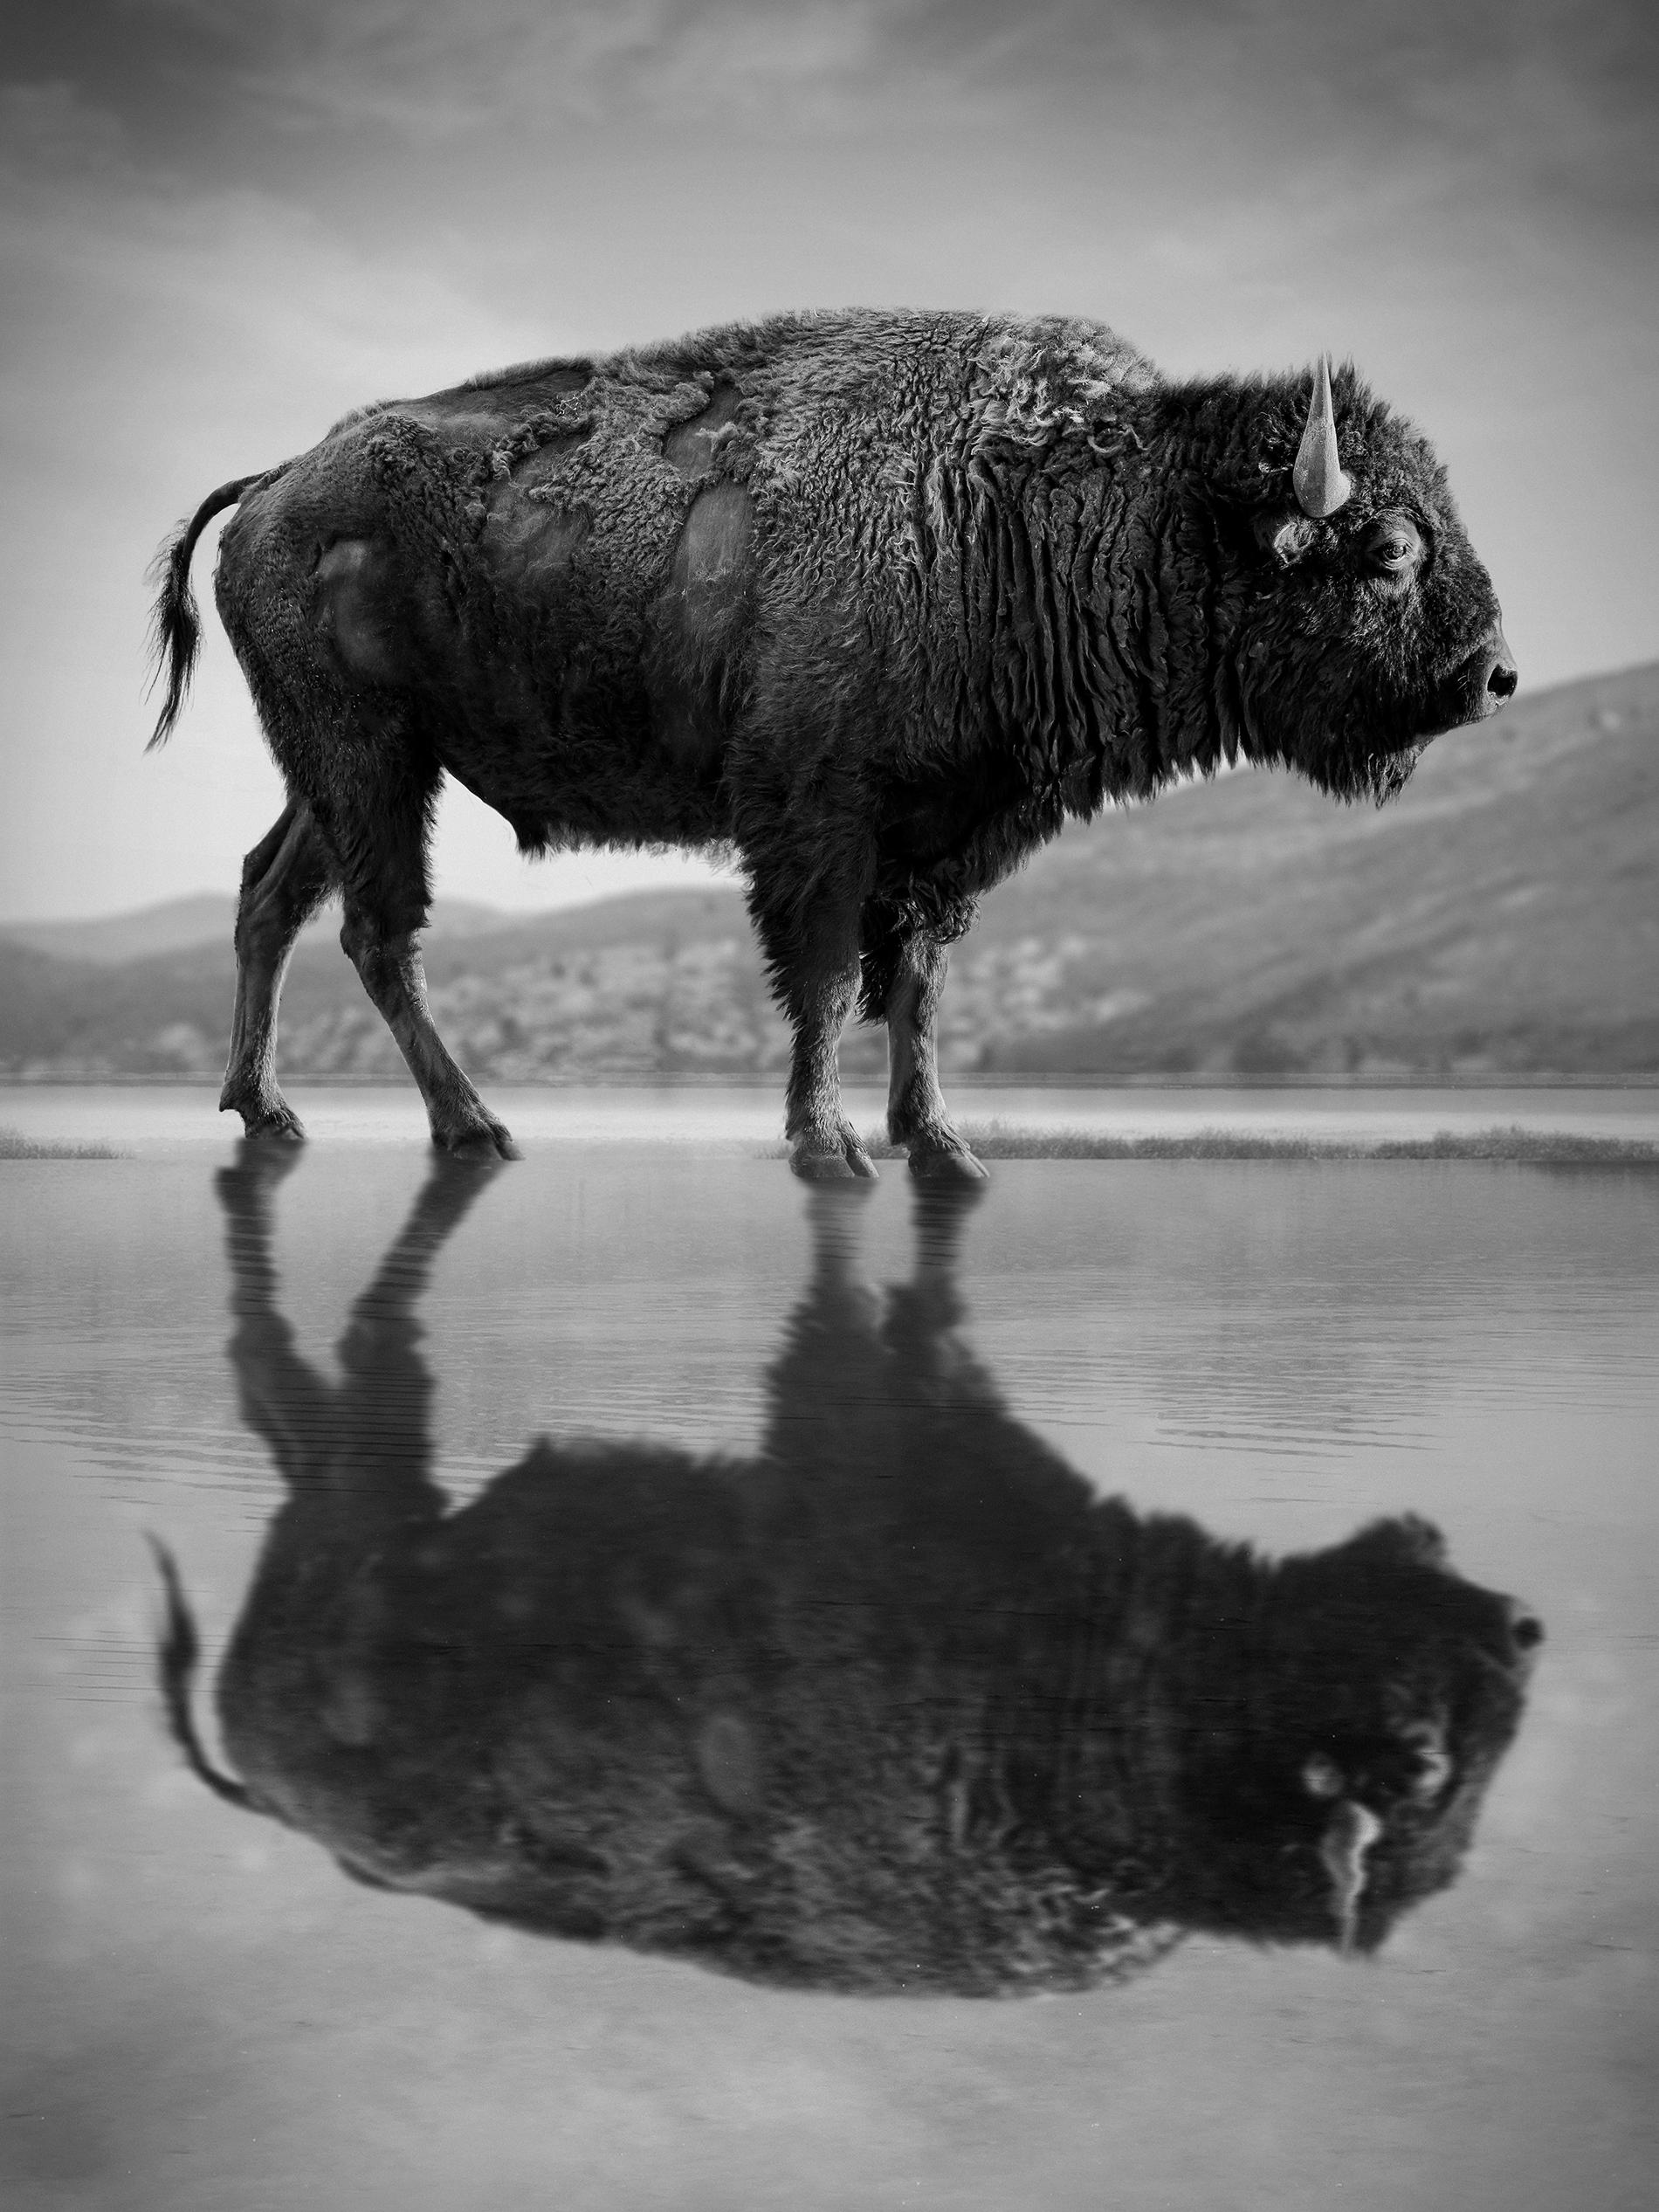 Shane Russeck Black and White Photograph - "Old World" 75x50 Black & White Photography Bison Buffalo Signed Photograph